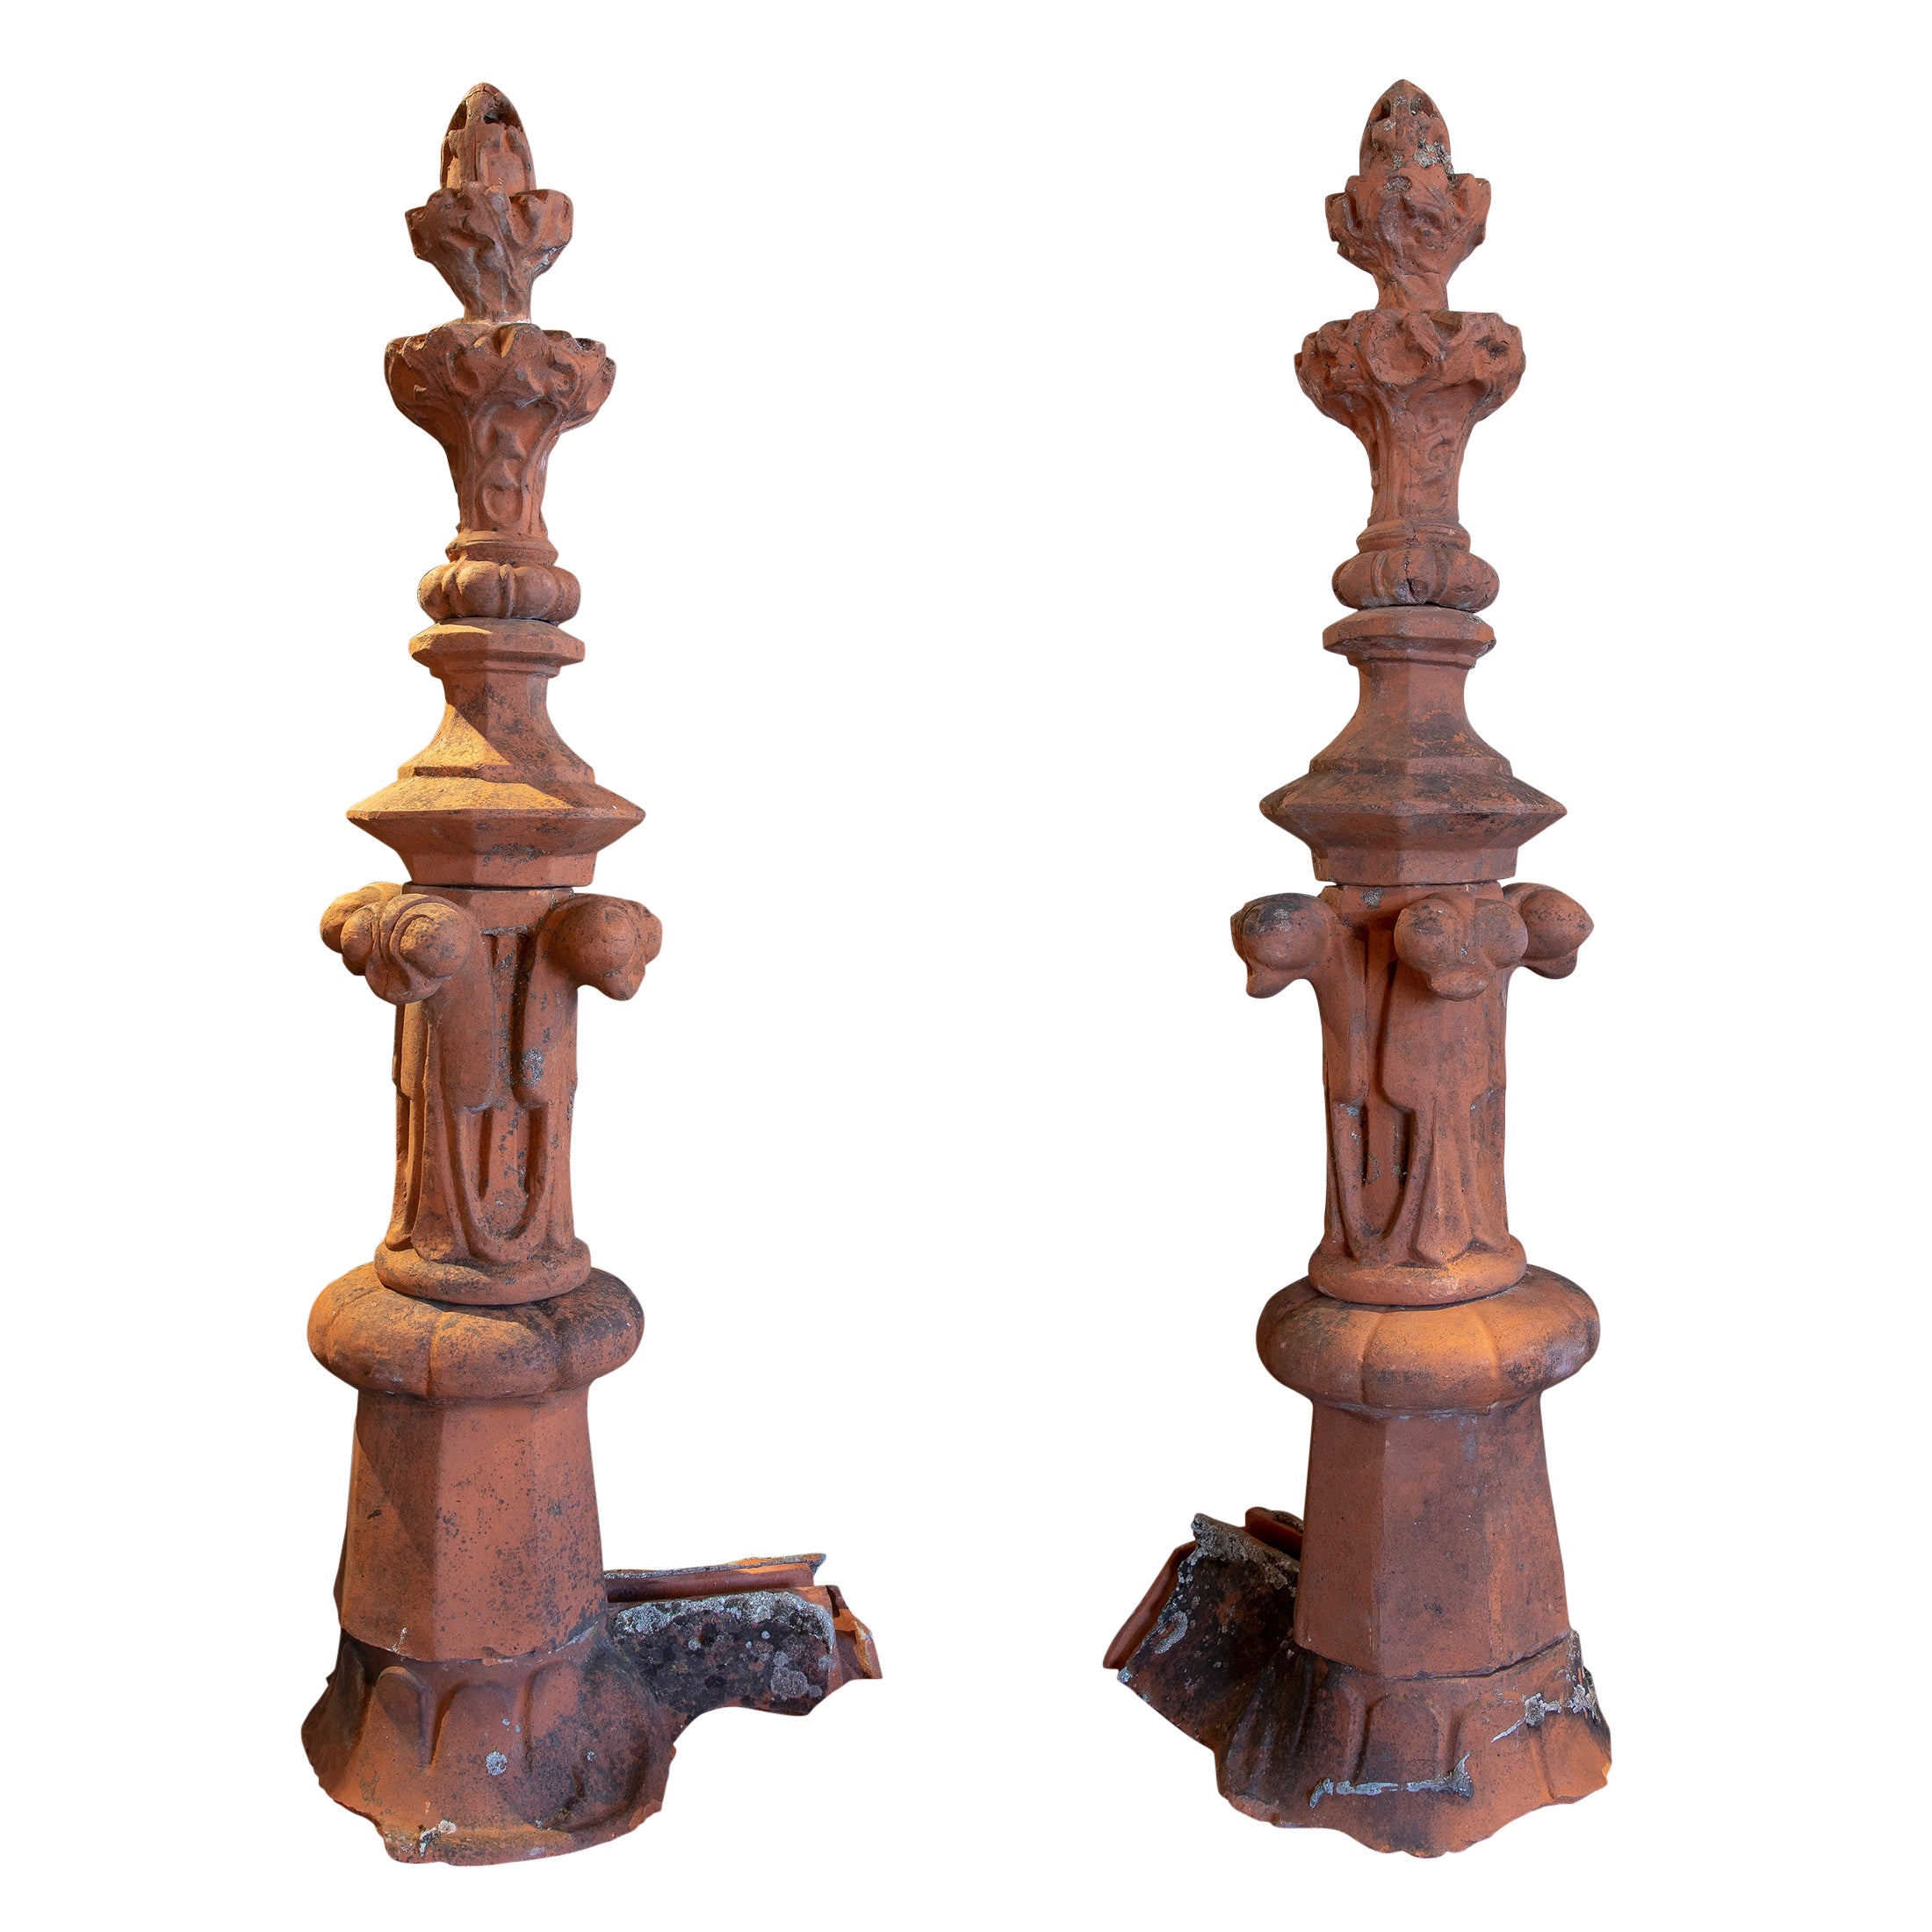 Neogothic French Pair of Ceramic Building Finials